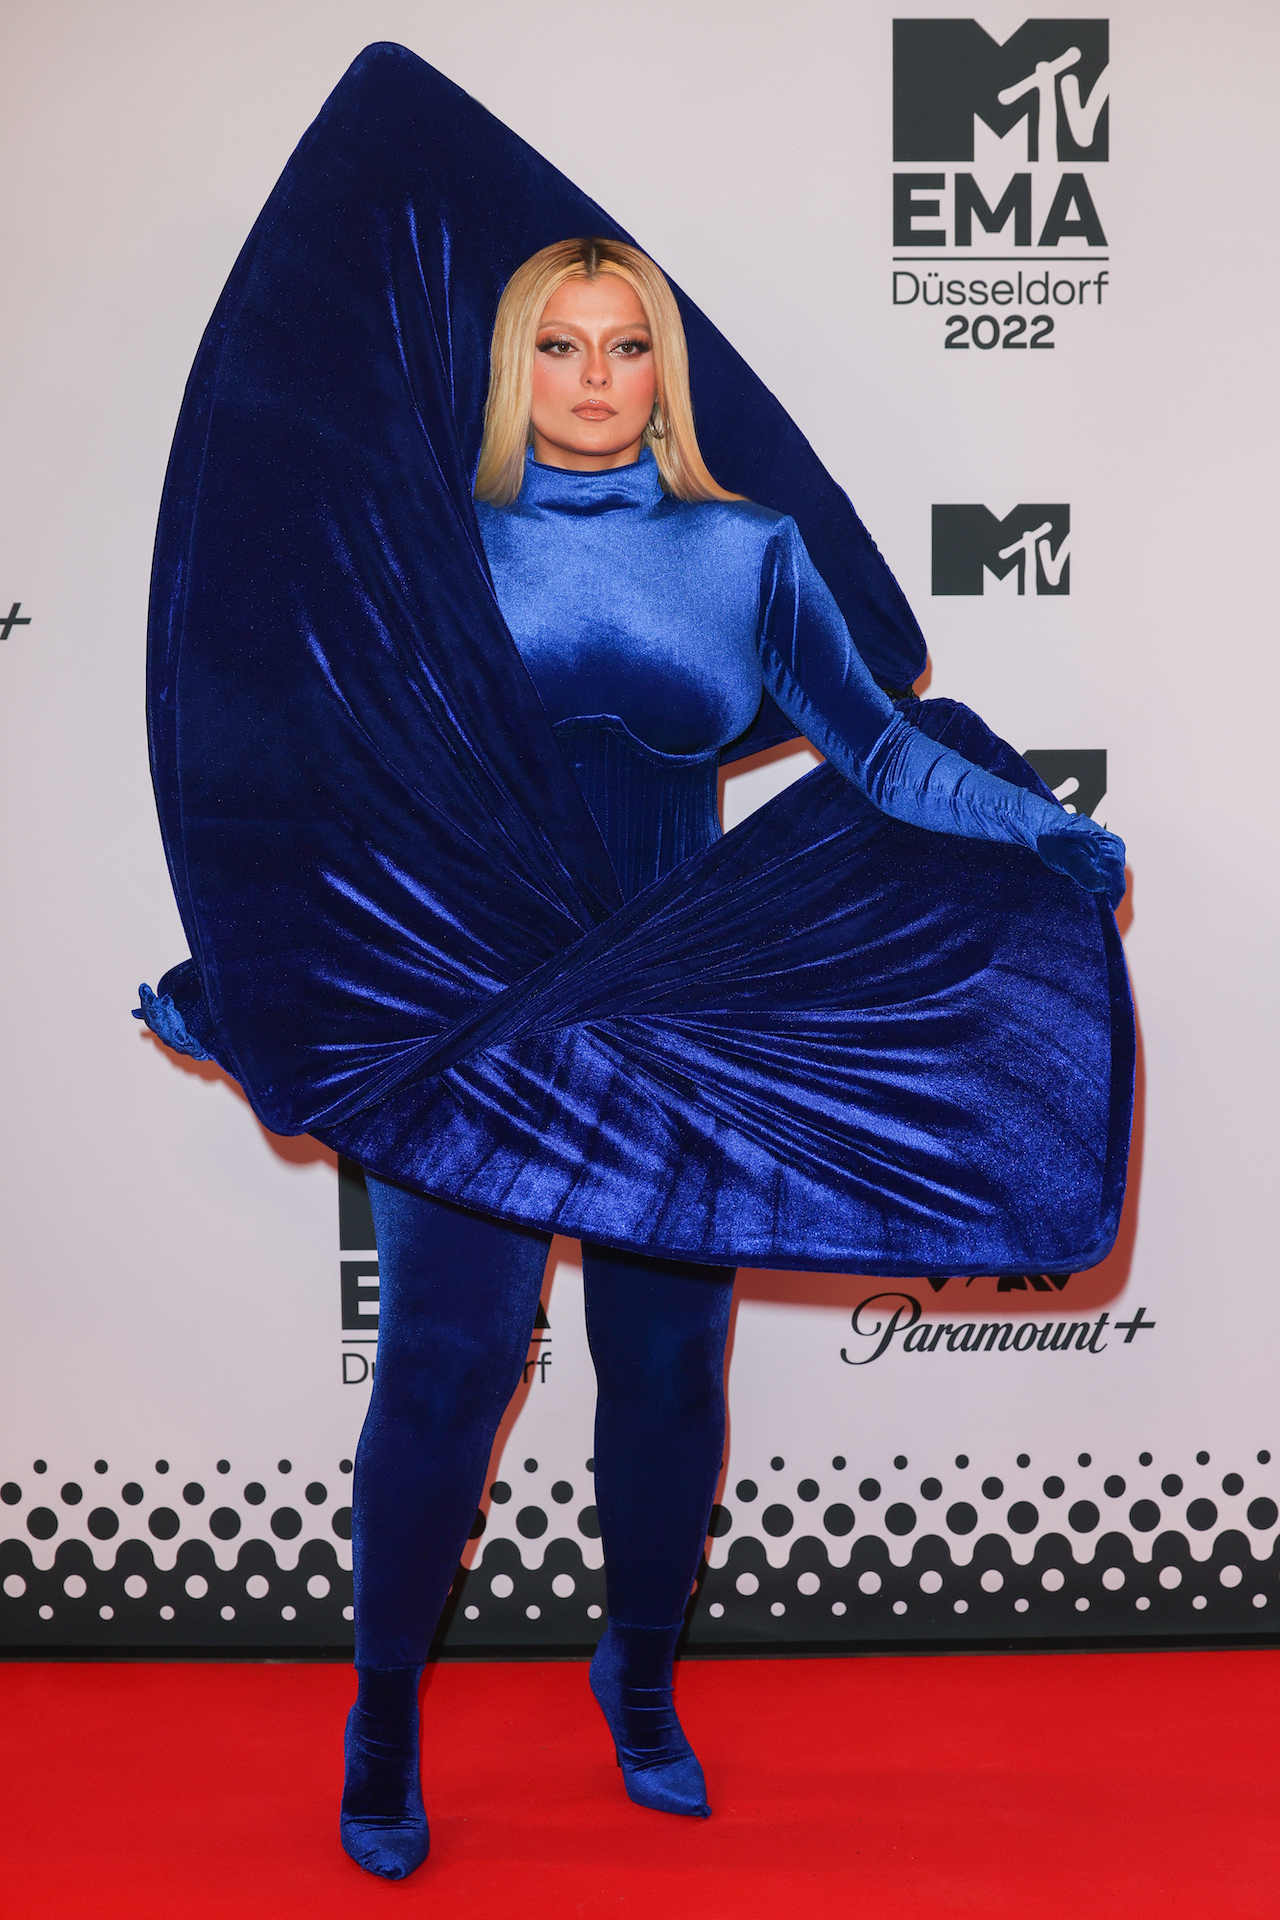  DUSSELDORF, GERMANY - NOVEMBER 13: Bebe Rexha during the 2022 MTV Europe Music Awards at the PSD Bank Dome on November 13, 2022 in Dusseldorf, Germany (Photo by Sven Hoogerhuis/BSR Agency/Getty Images)